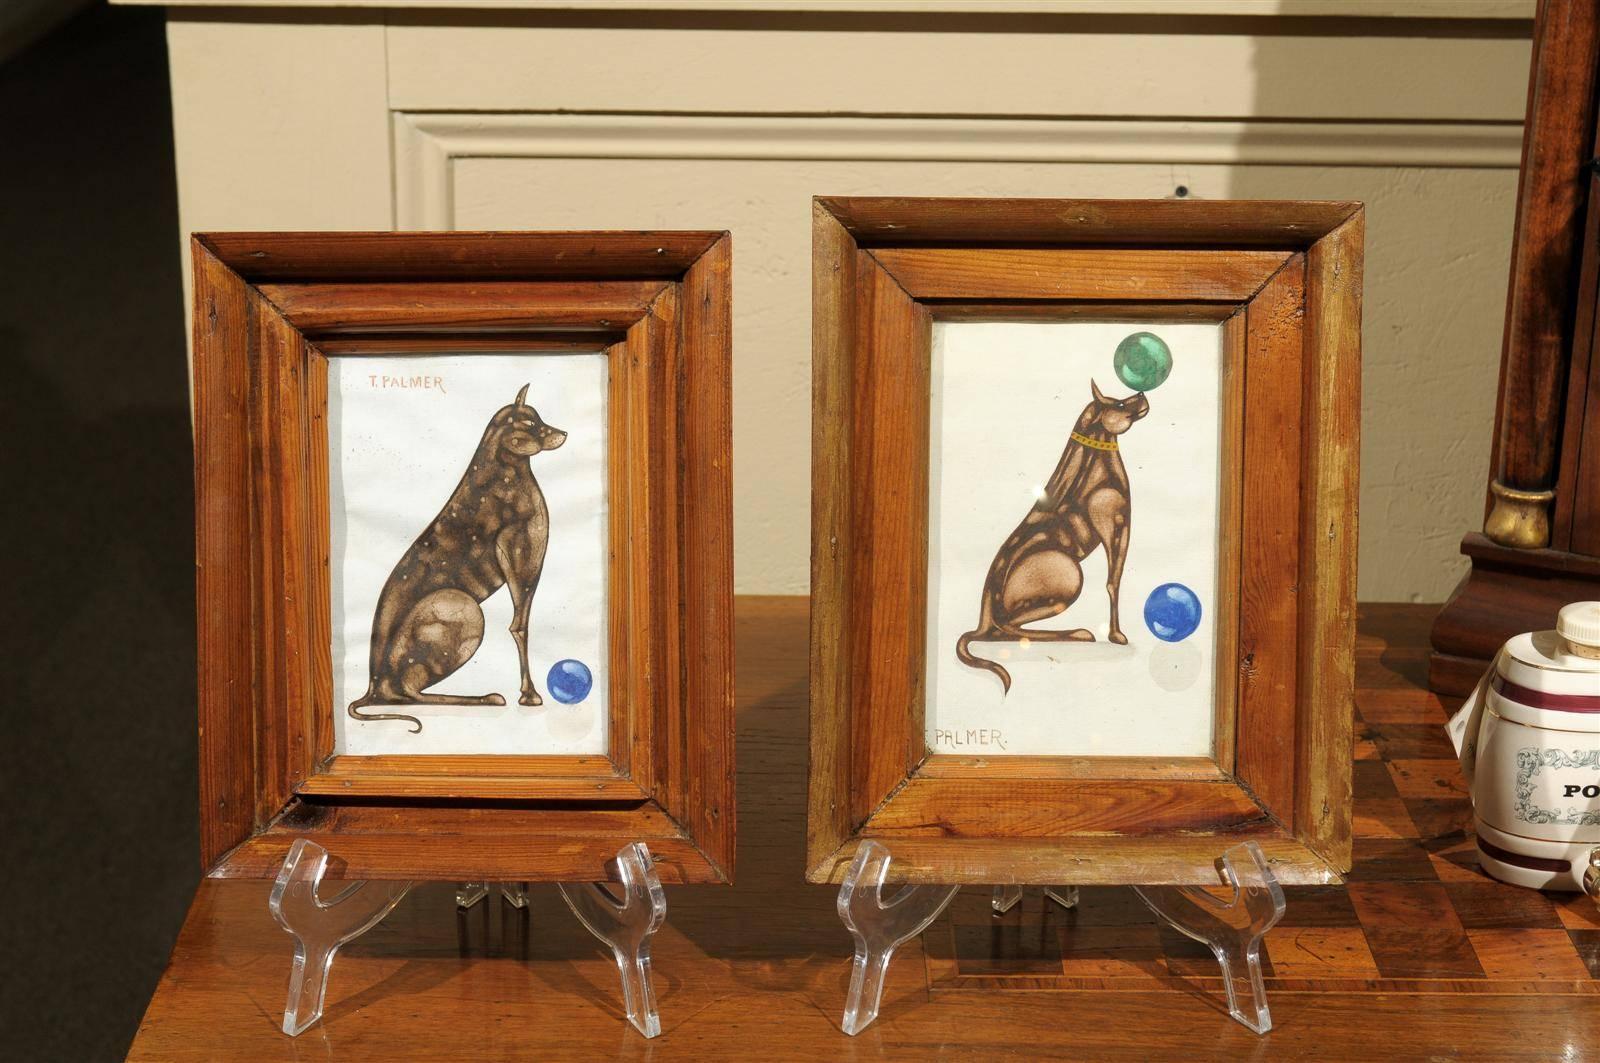 Early 20th century Art Deco Period friendly pair of English watercolor studies of dogs, painted by T. Palmer in a stylized manner with toy balls. Signed and in fruitwood frames.